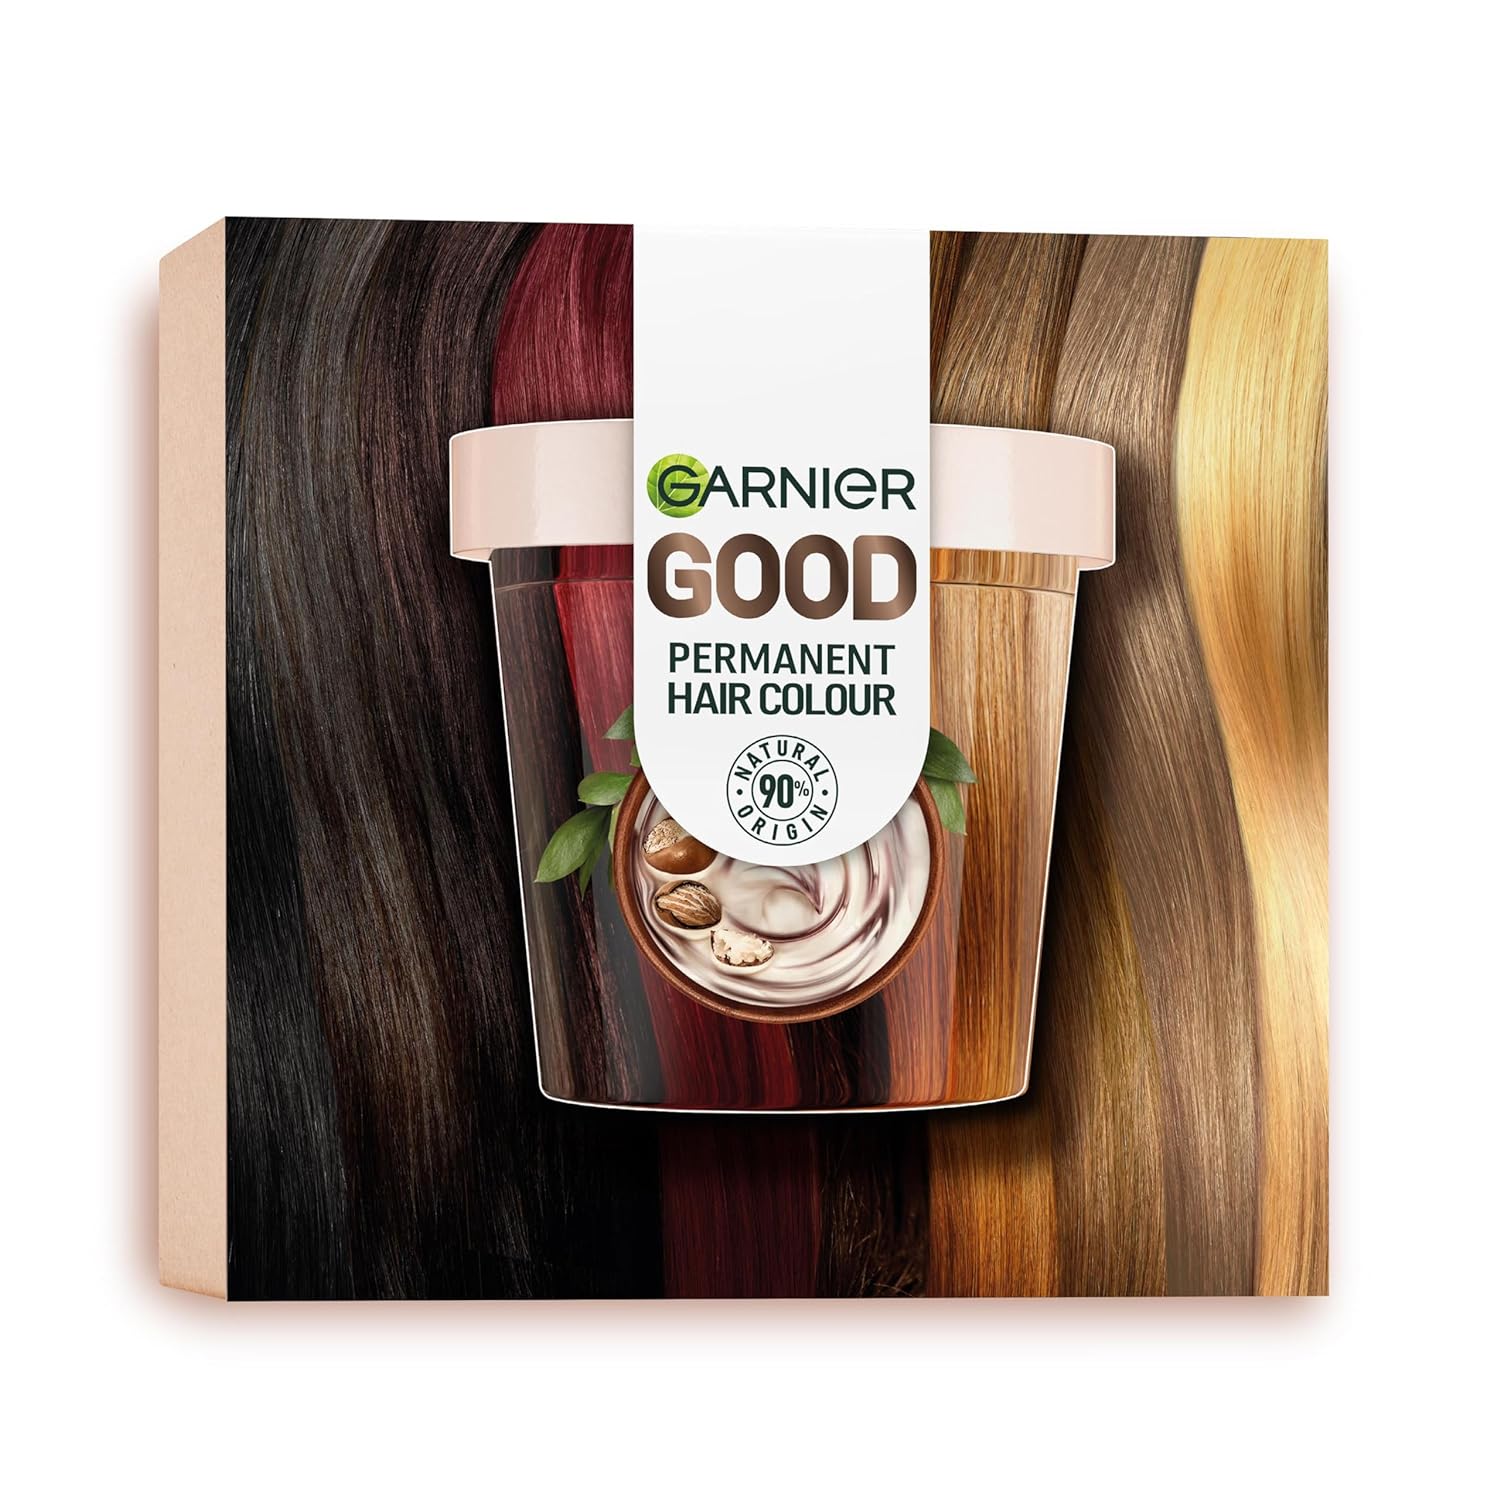 Garnier Permanent Hair Colour, Hair Dye Set for Intense and Long-Lasting Hair Colour, Colouration for up to 8 Weeks of Radiant Colour, No Ammonia, 6.0 Mochaccino Brown, Good Refill Kit